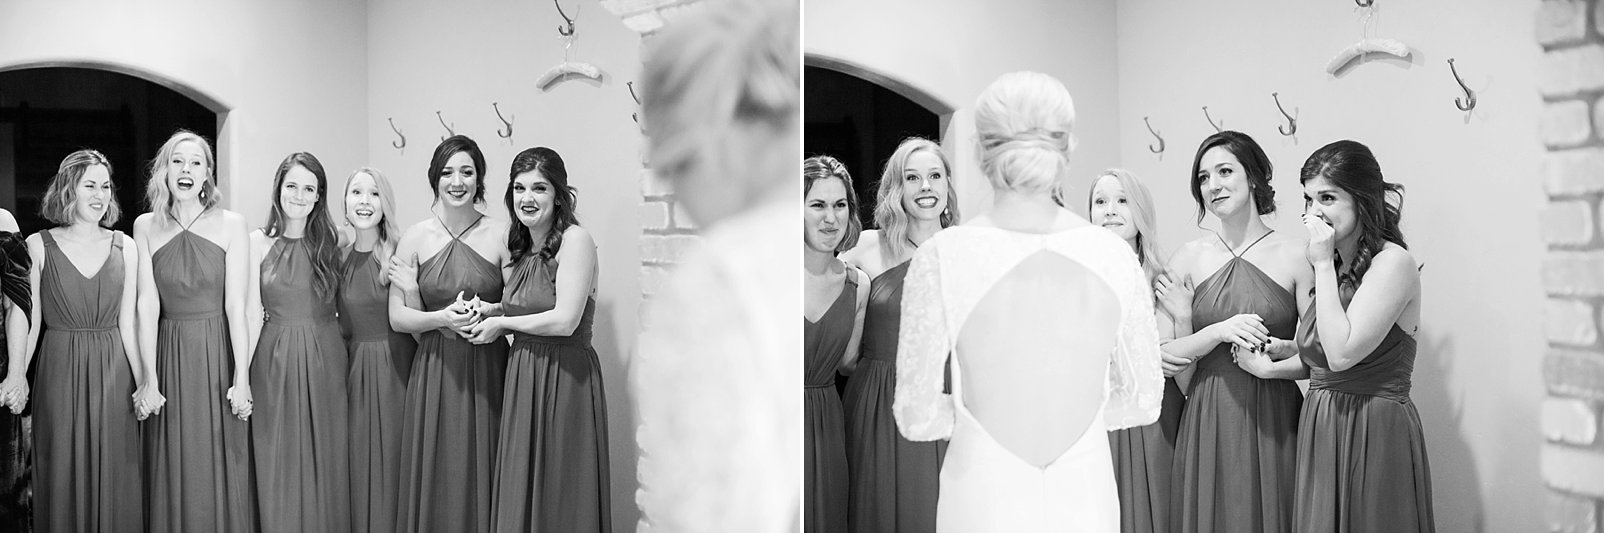 bridesmaid seeing bride for the first time